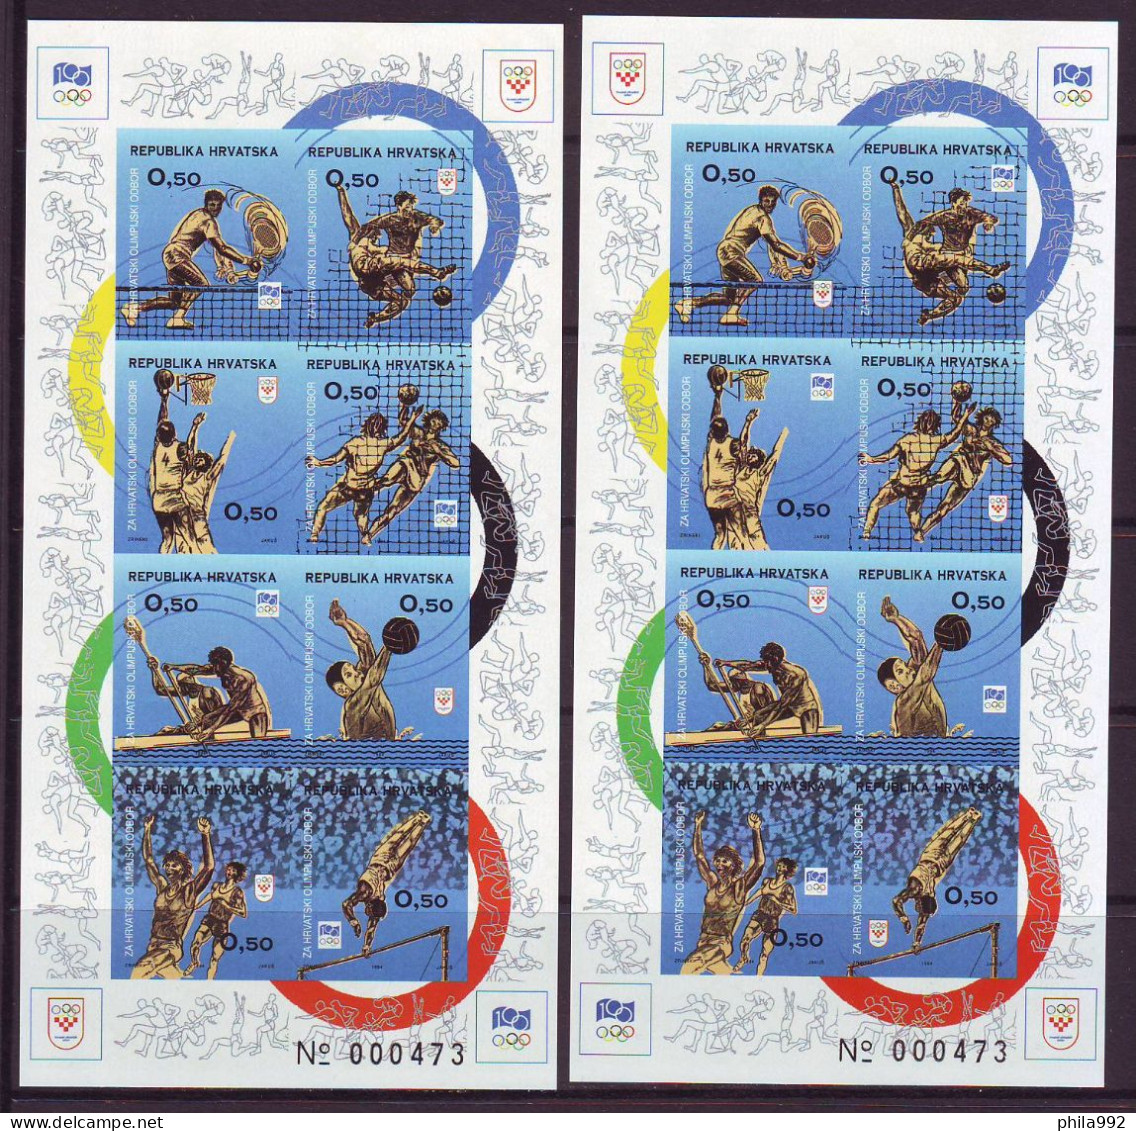 Croatia 1994 Charity Stamp SPORT Mi.No.42-49+50-57 2  Imperforated Mini Sheet Olympic Committee MNH - Croatie